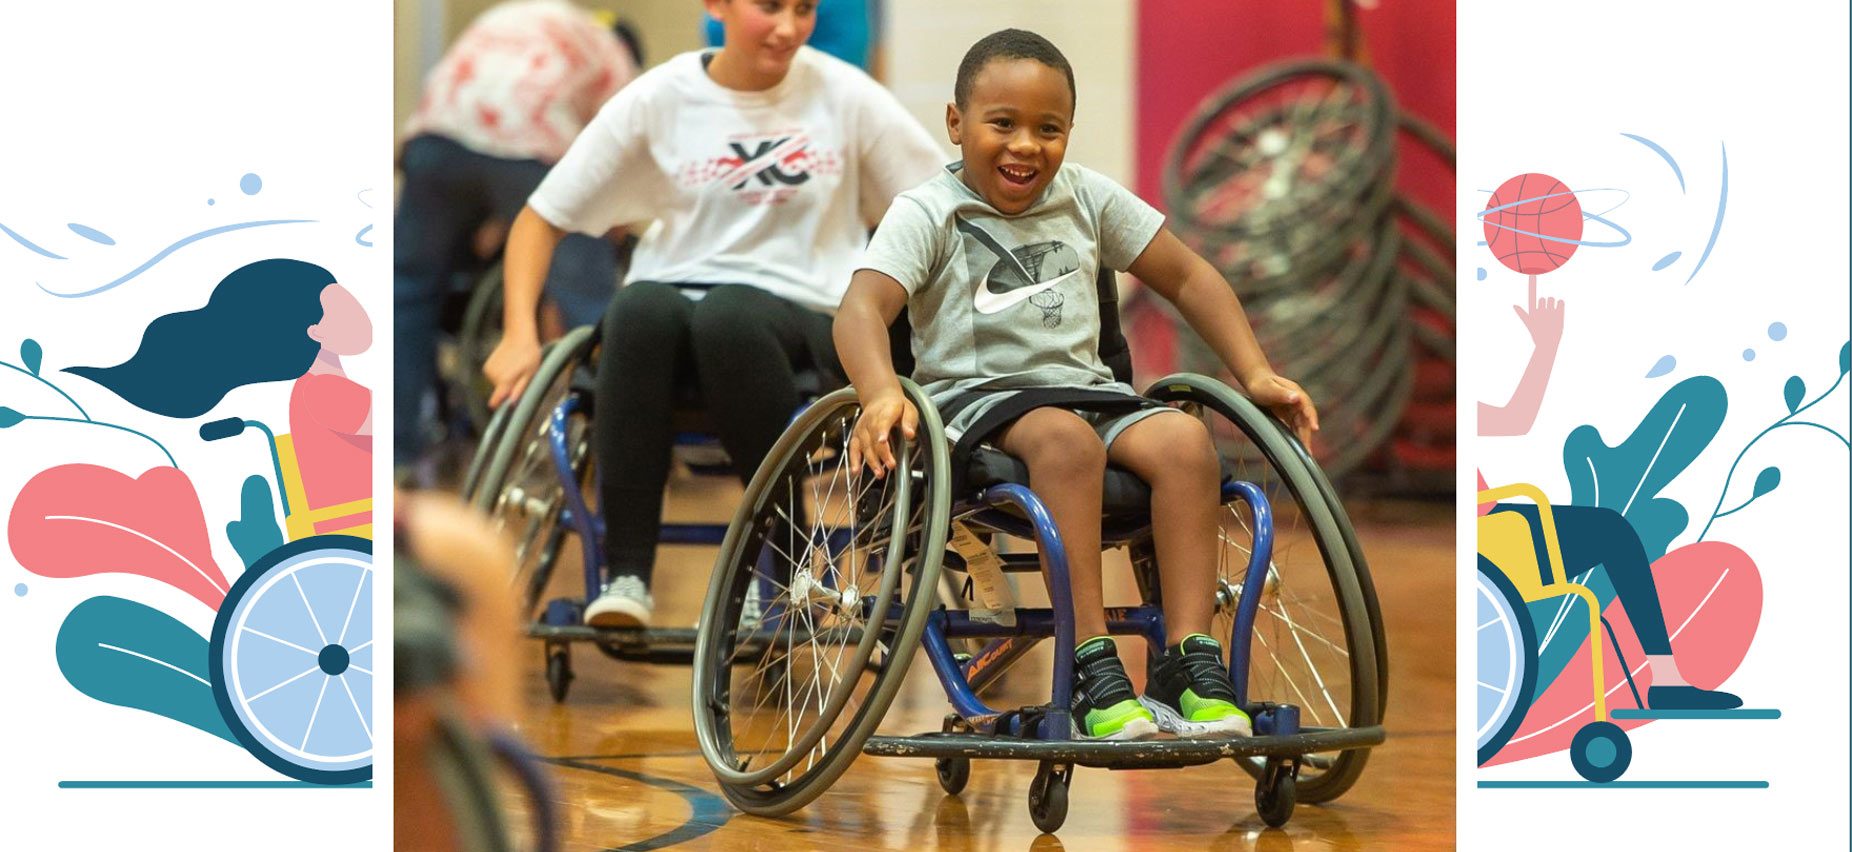 Come Out and Play: Move Along offers adaptive sports for youth, adults -  Family Times